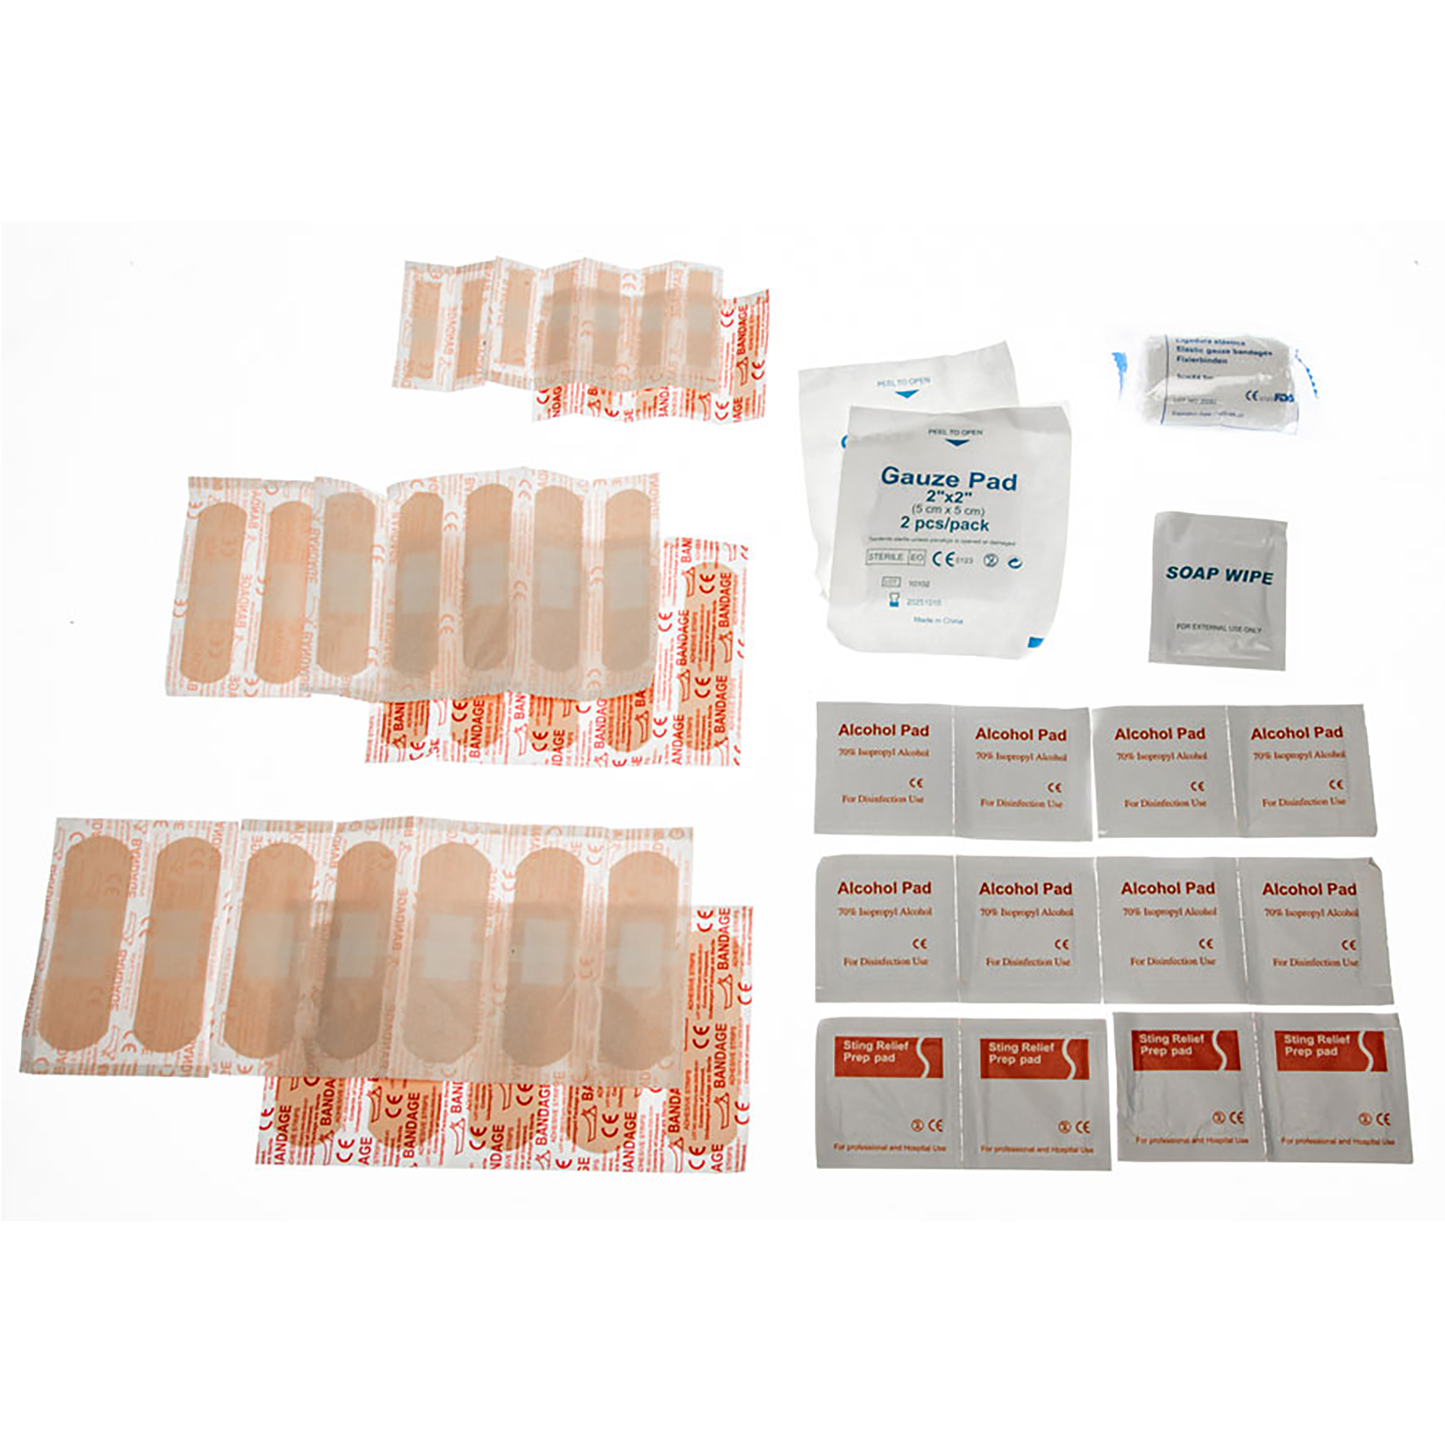 55PC FIRST AID TRAVEL KIT